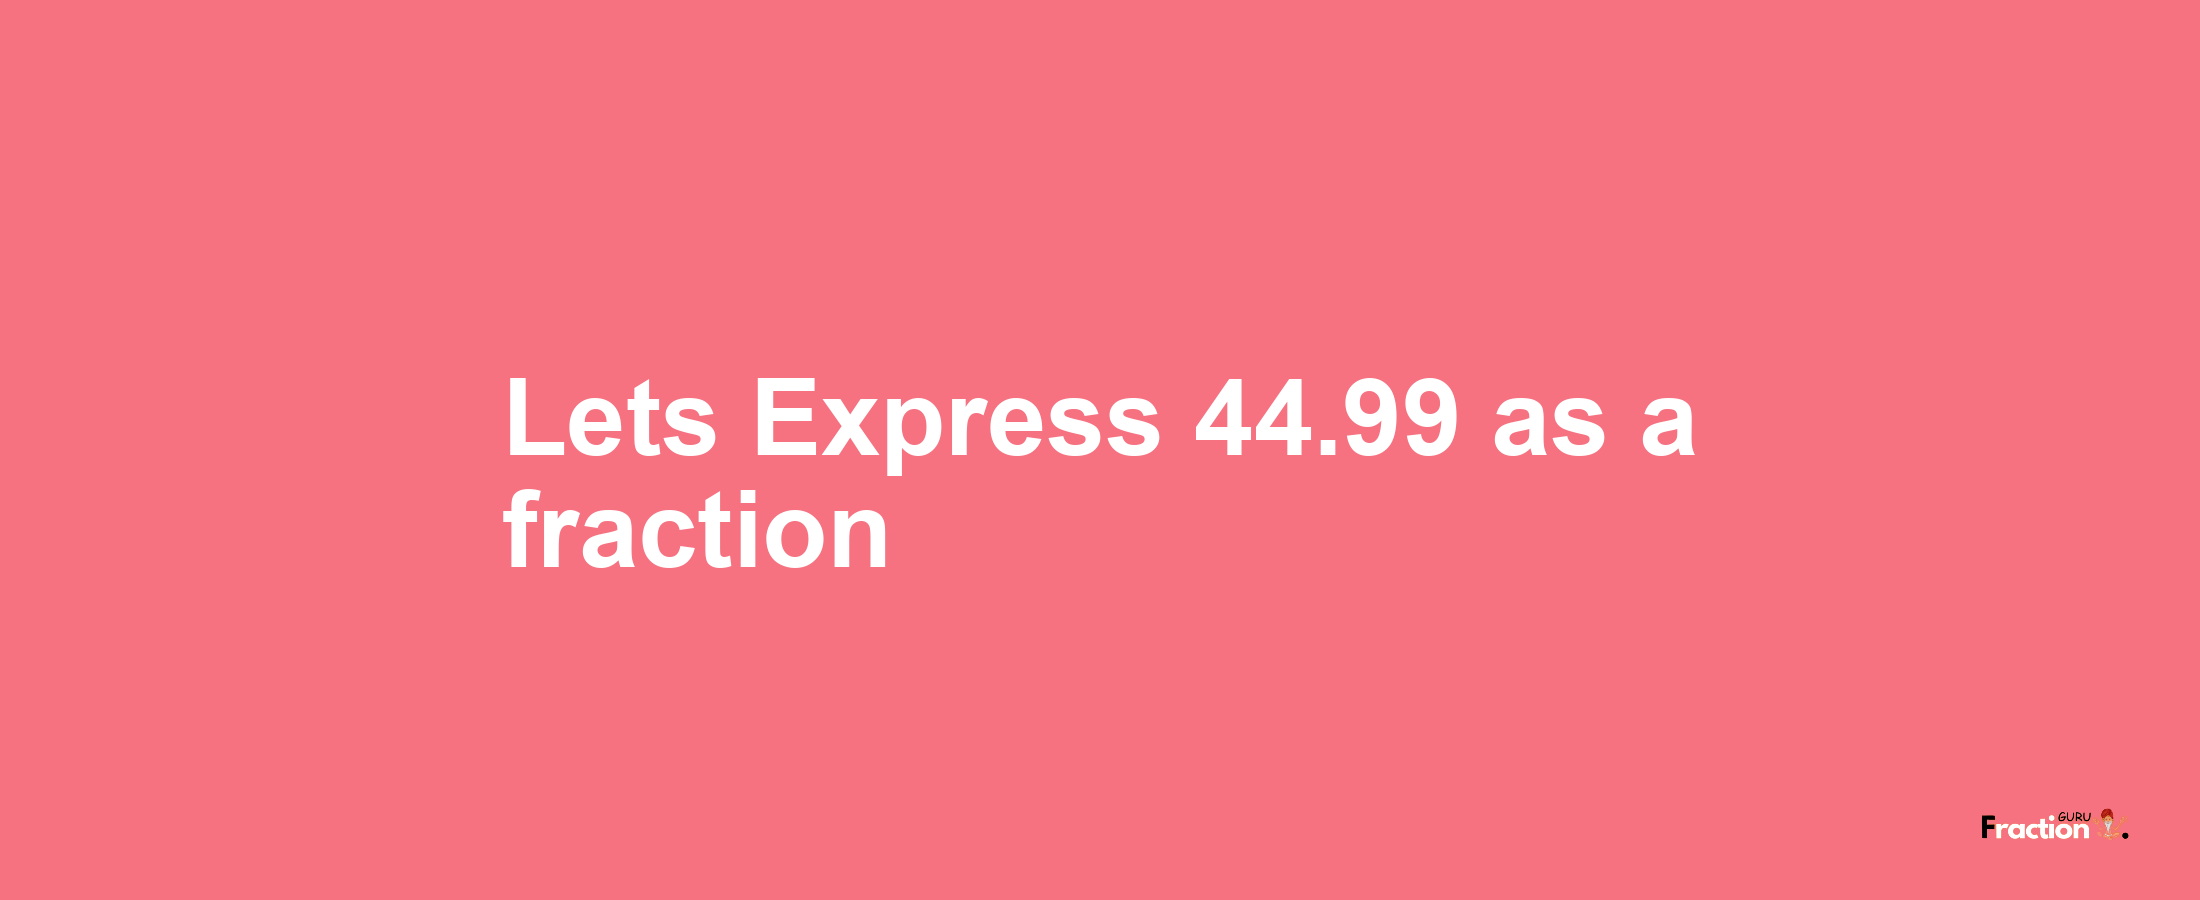 Lets Express 44.99 as afraction